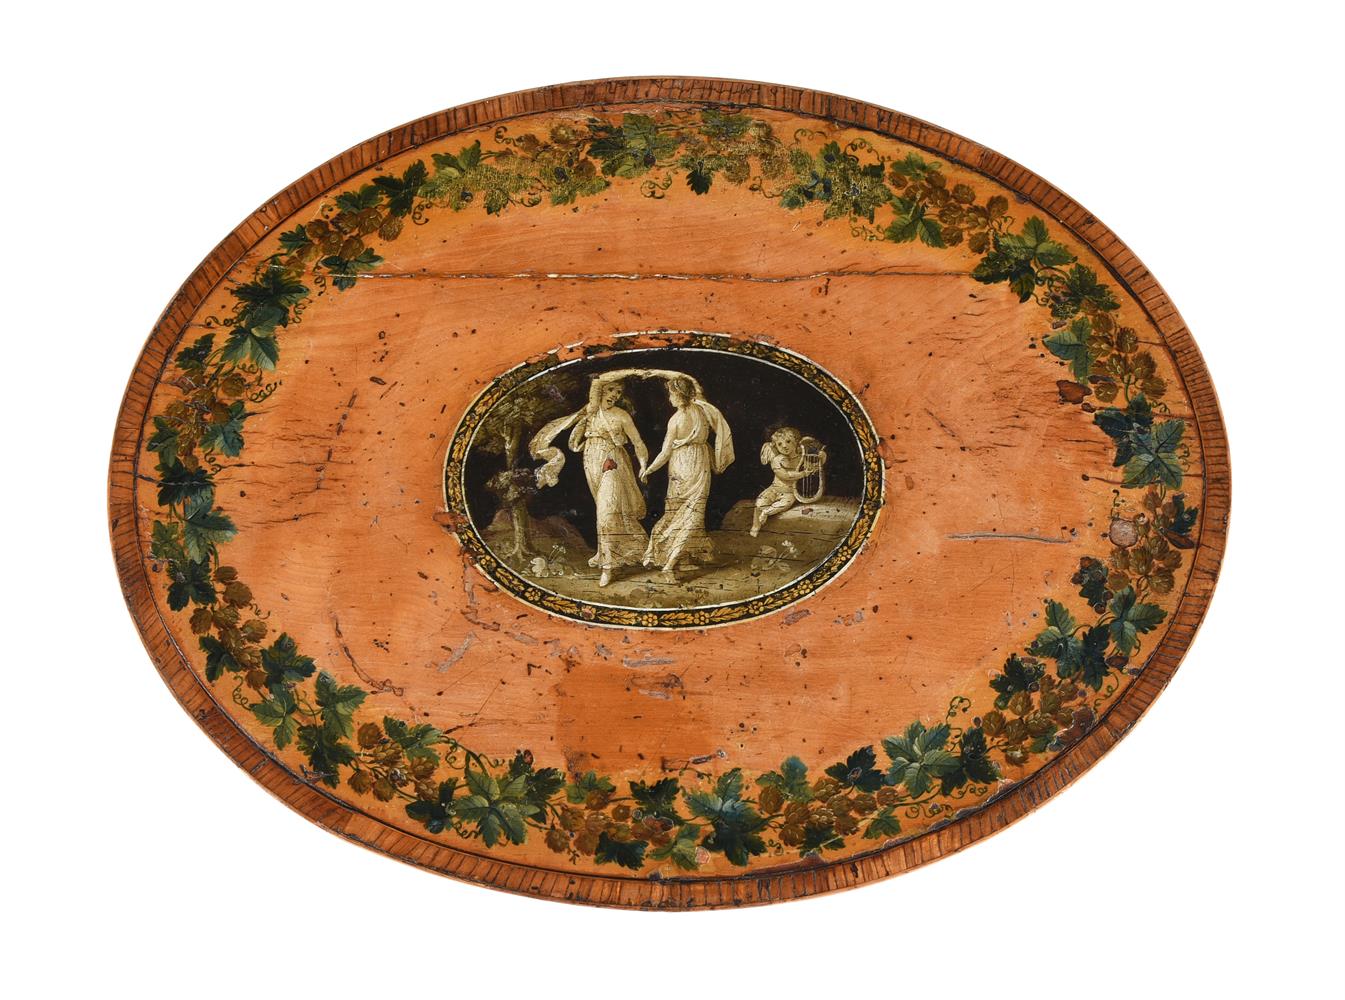 A GEORGE III SATINWOOD AND POLYCHROME PAINTED WORK TABLE IN THE MANNER OF KAUFFMANN - Image 2 of 3